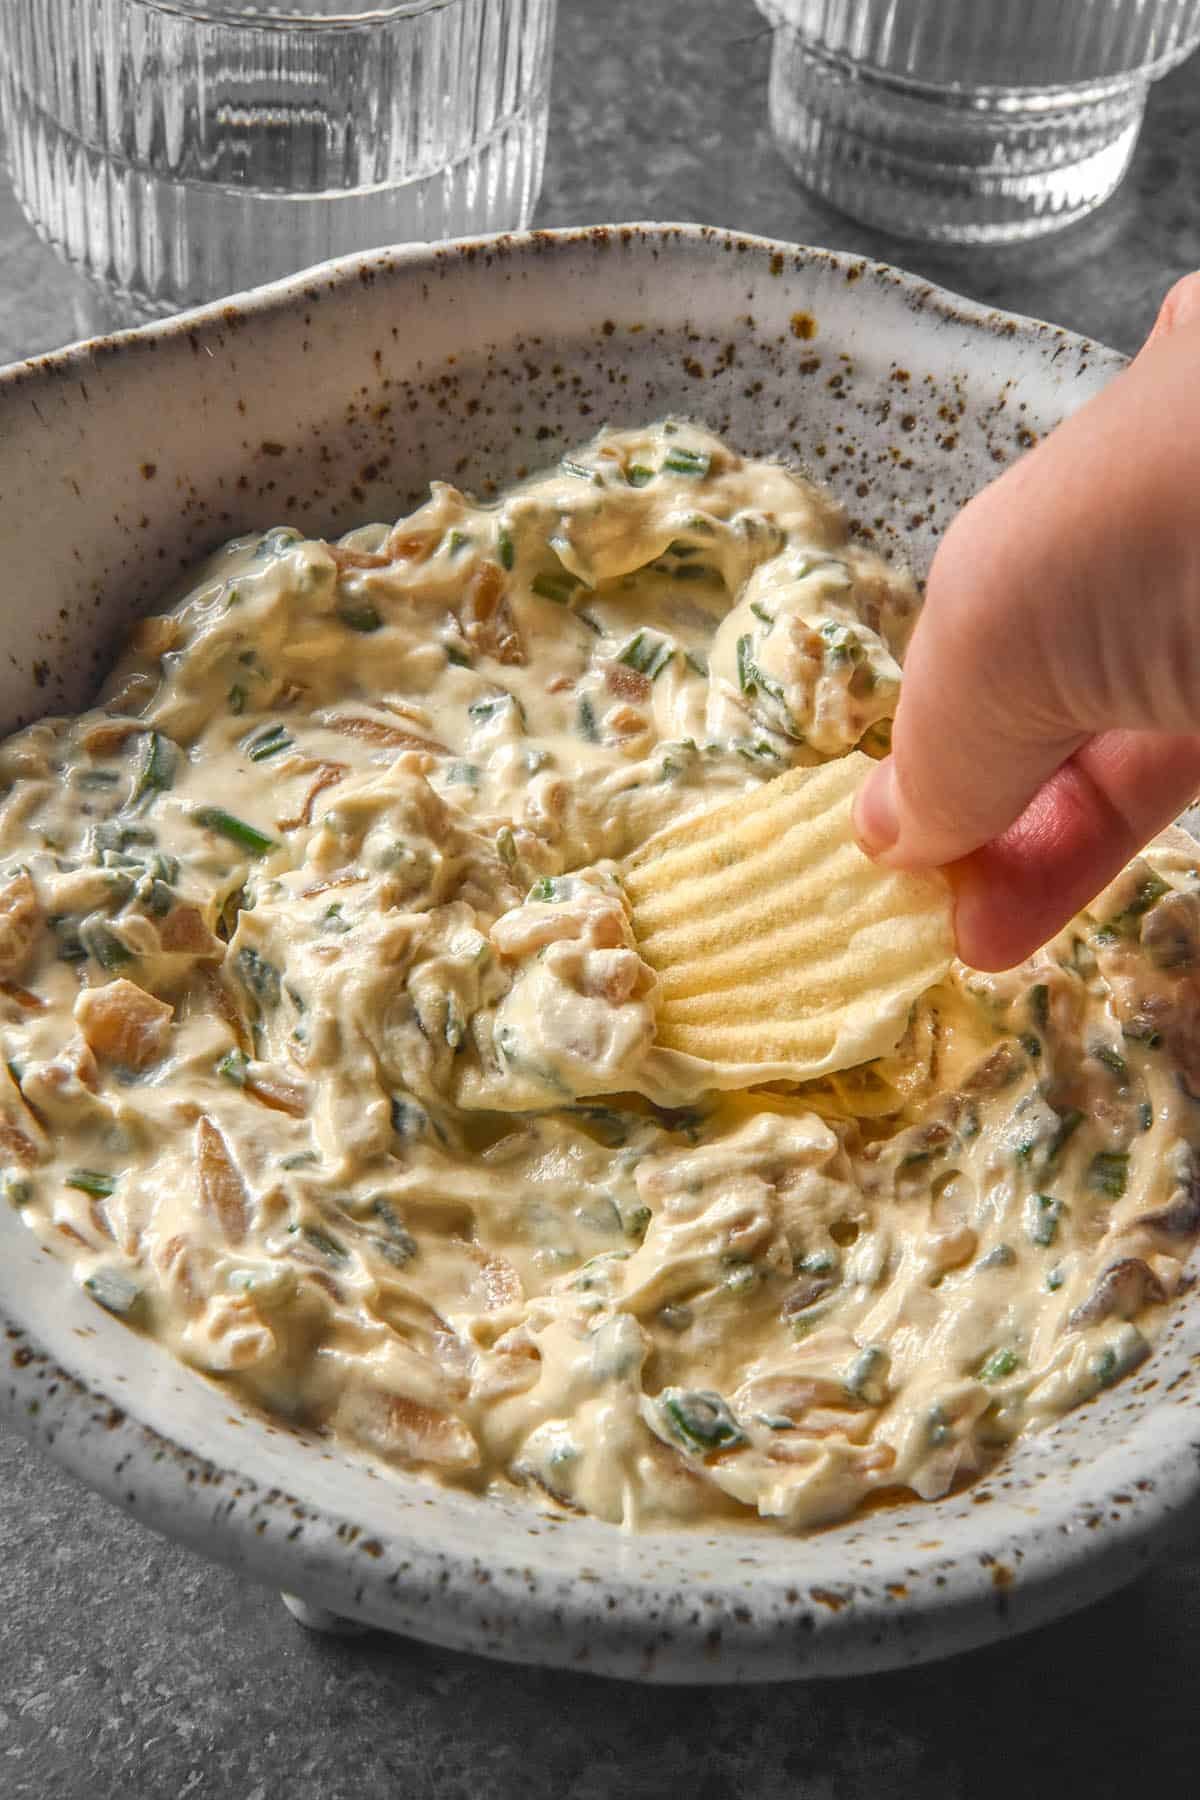 A side on image of a white speckled ceramic bowl filled with low FODMAP French Onion Dip. A hand dips into the bowl from the right side with a crinkled cut chip. Two glasses of water sit in the background of the image.